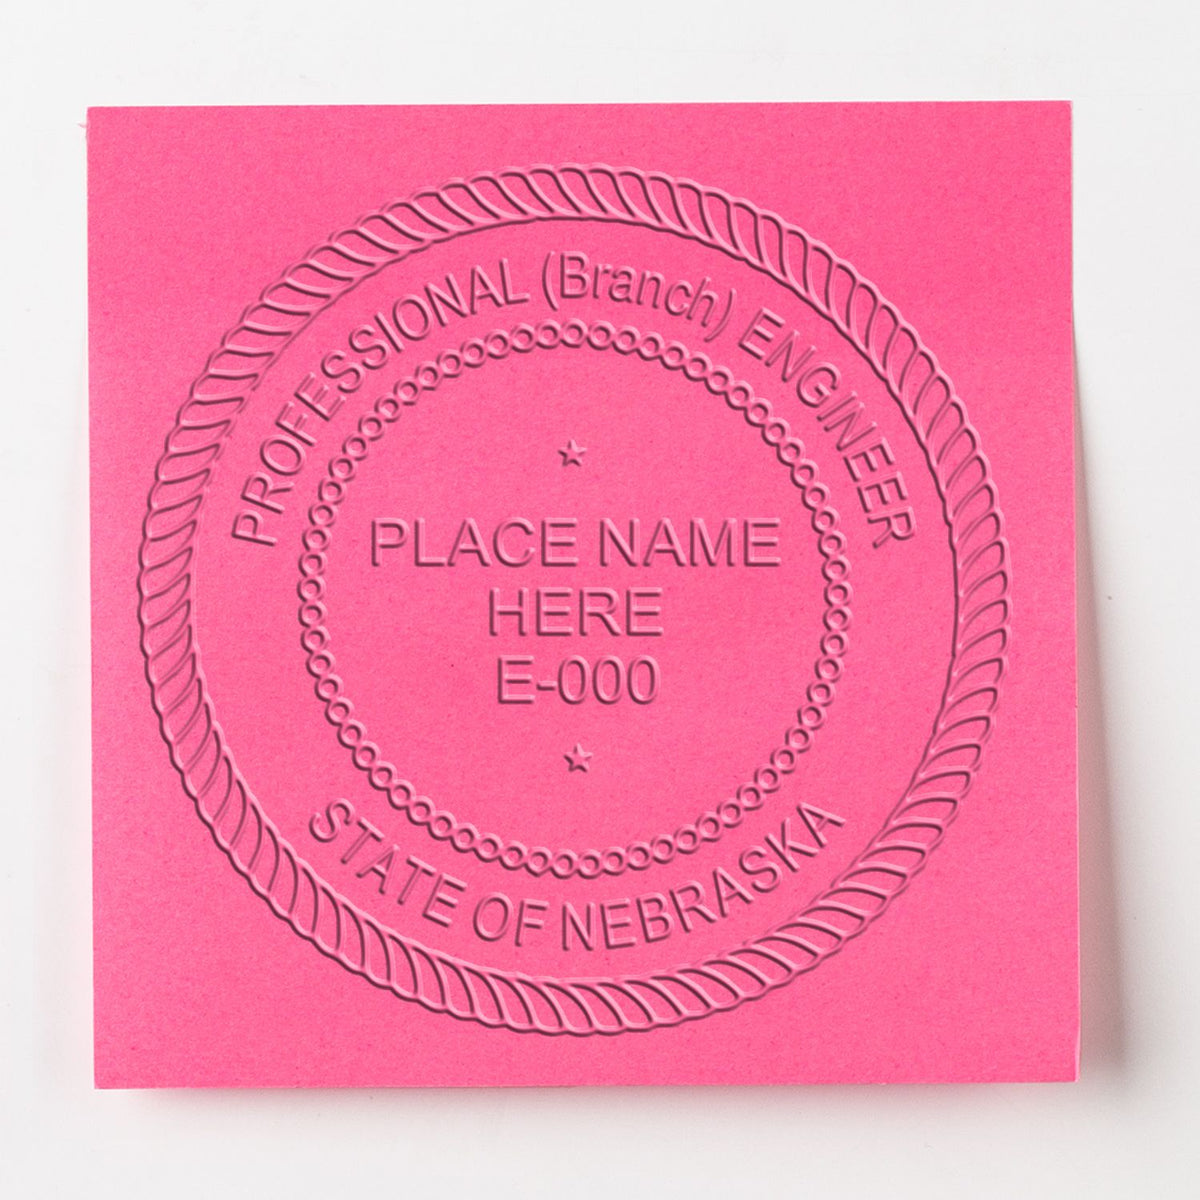 This paper is stamped with a sample imprint of the Soft Nebraska Professional Engineer Seal, signifying its quality and reliability.